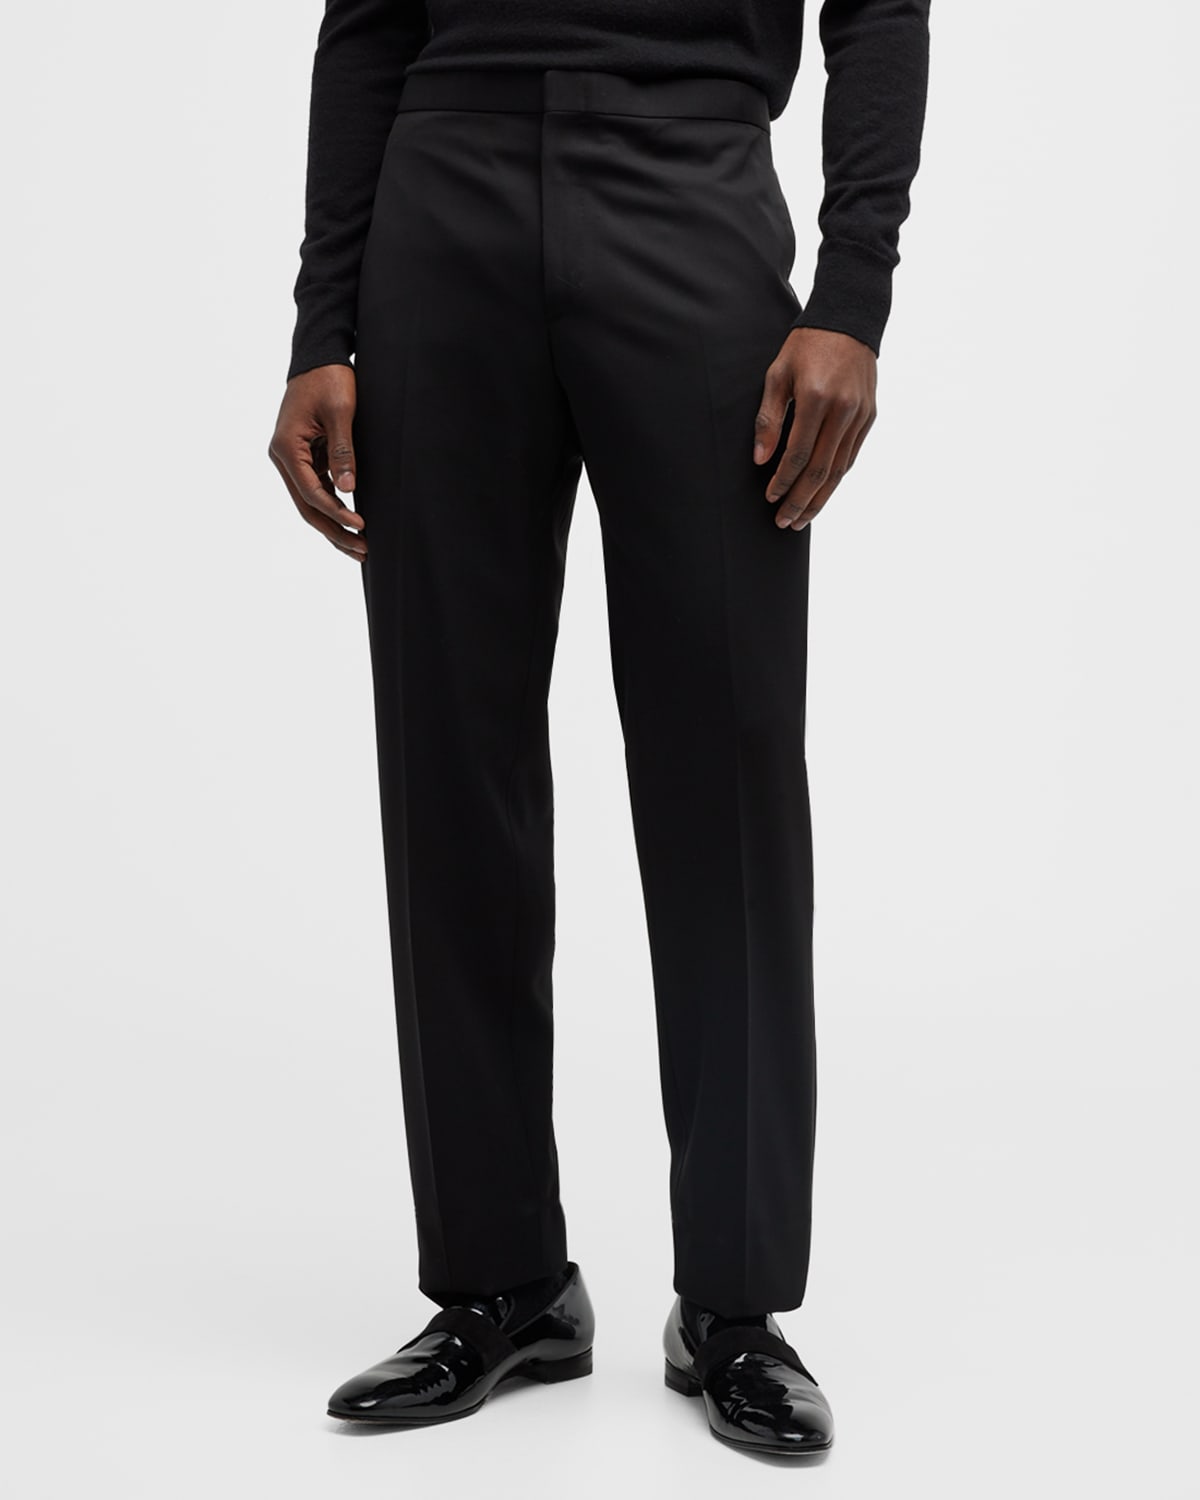 Men's Solid Formal Trousers